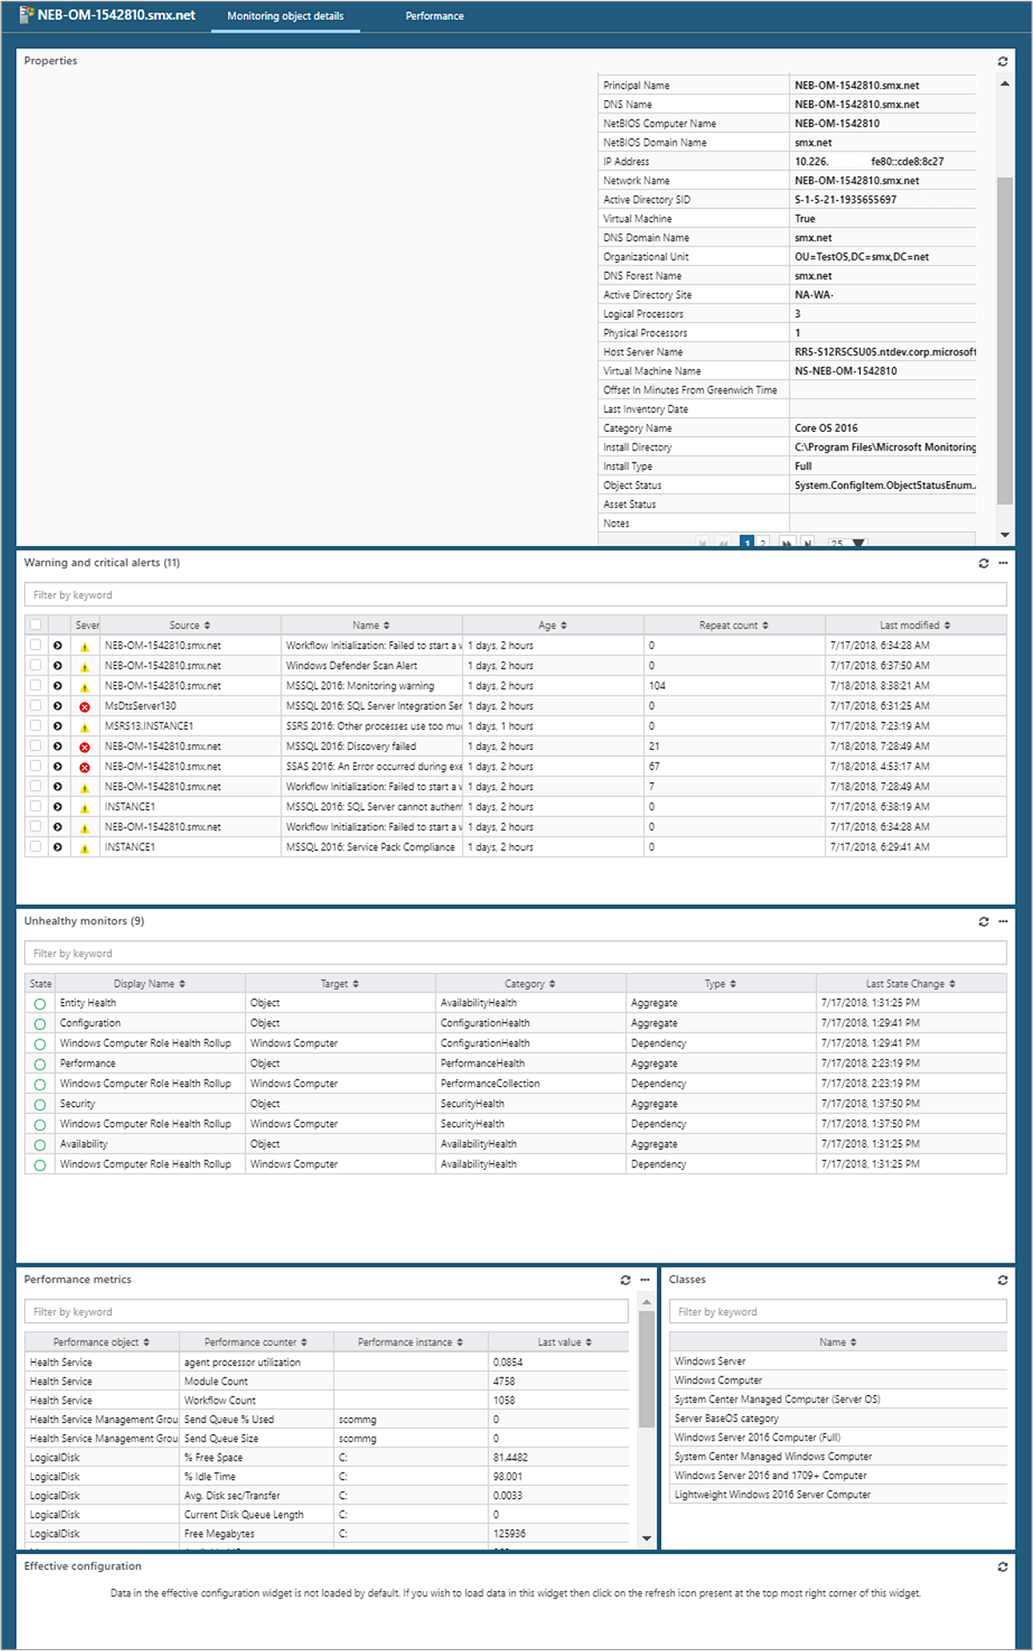 Screenshot showing Monitored object details page.